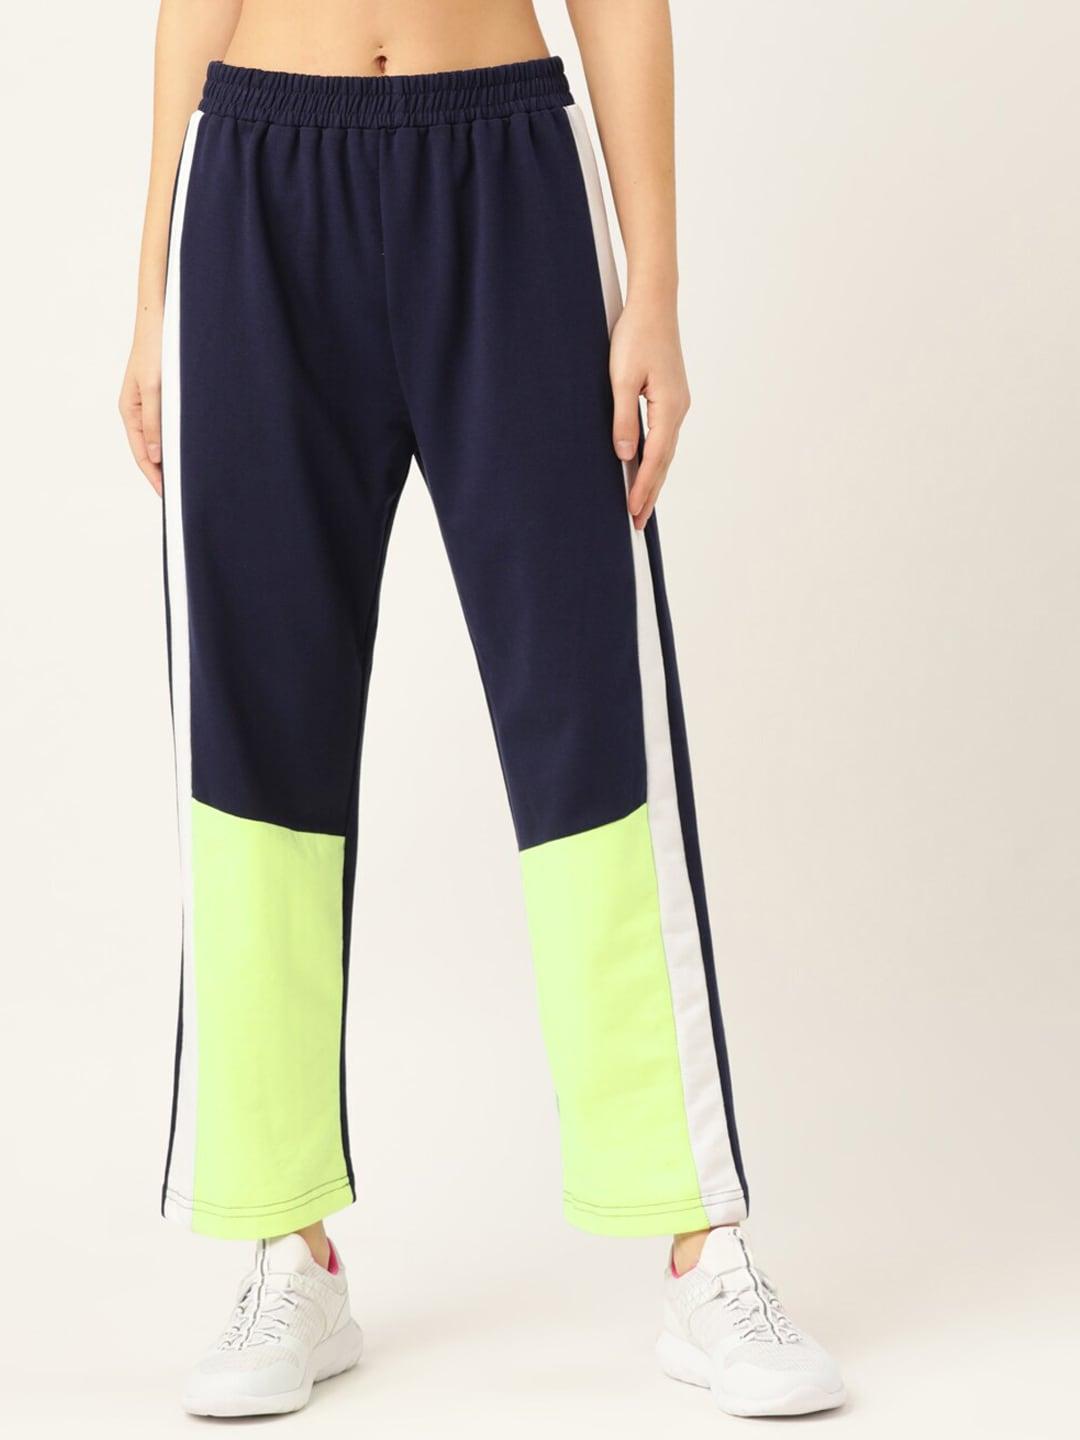 Laabha Women Navy Blue & Lime green Colourblocked Staight Fit Track Pants